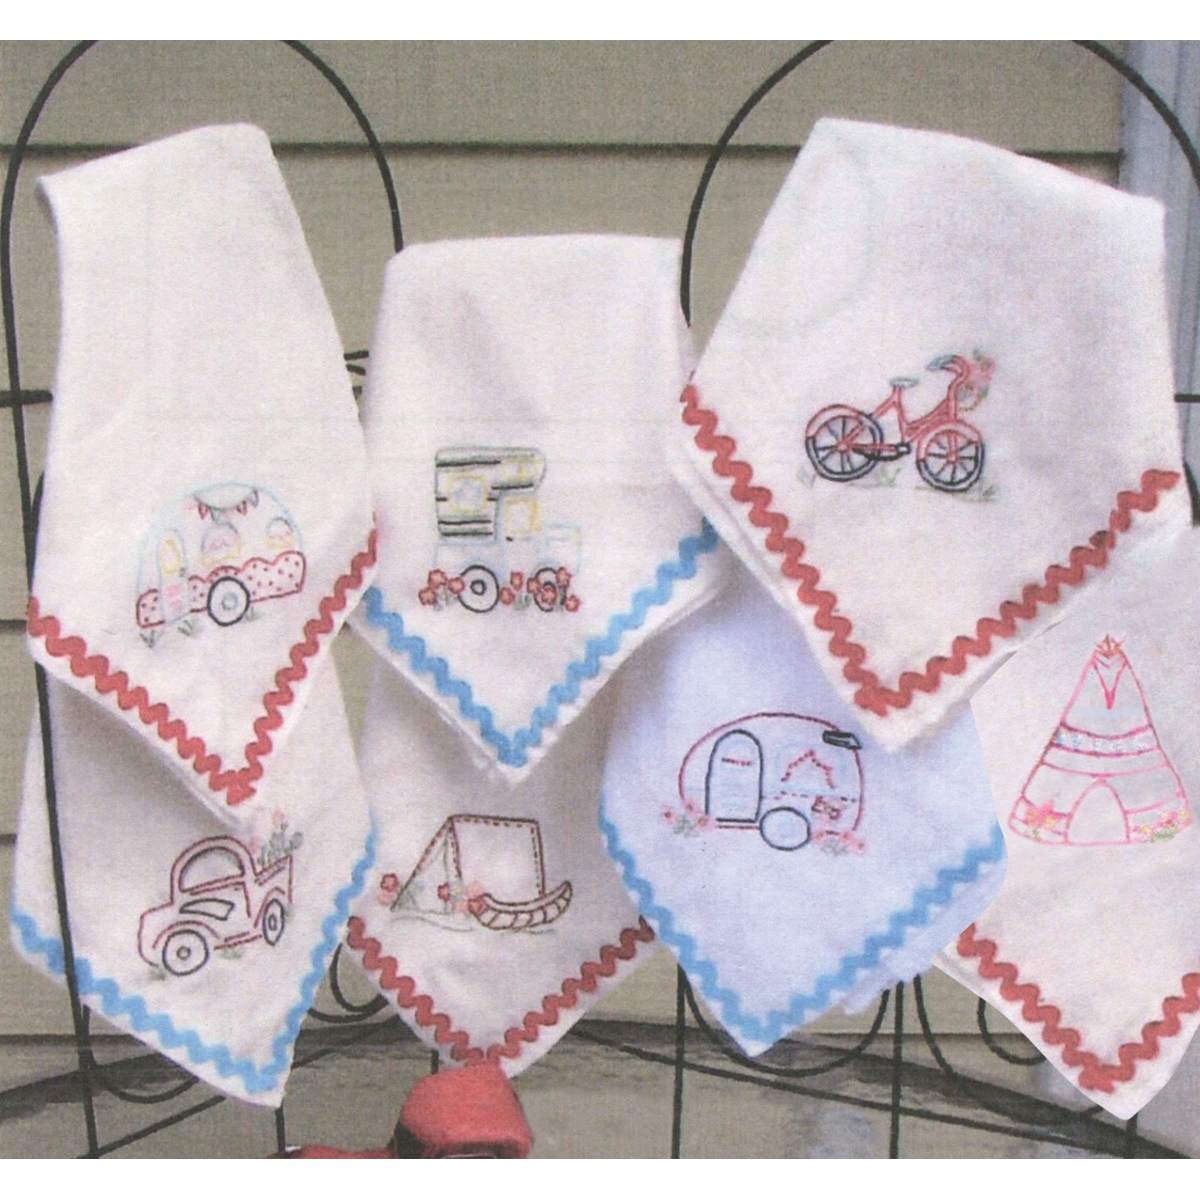 Handkerchief Embroidery Patterns On The Road Again Hand Embroidery Pattern And Towels